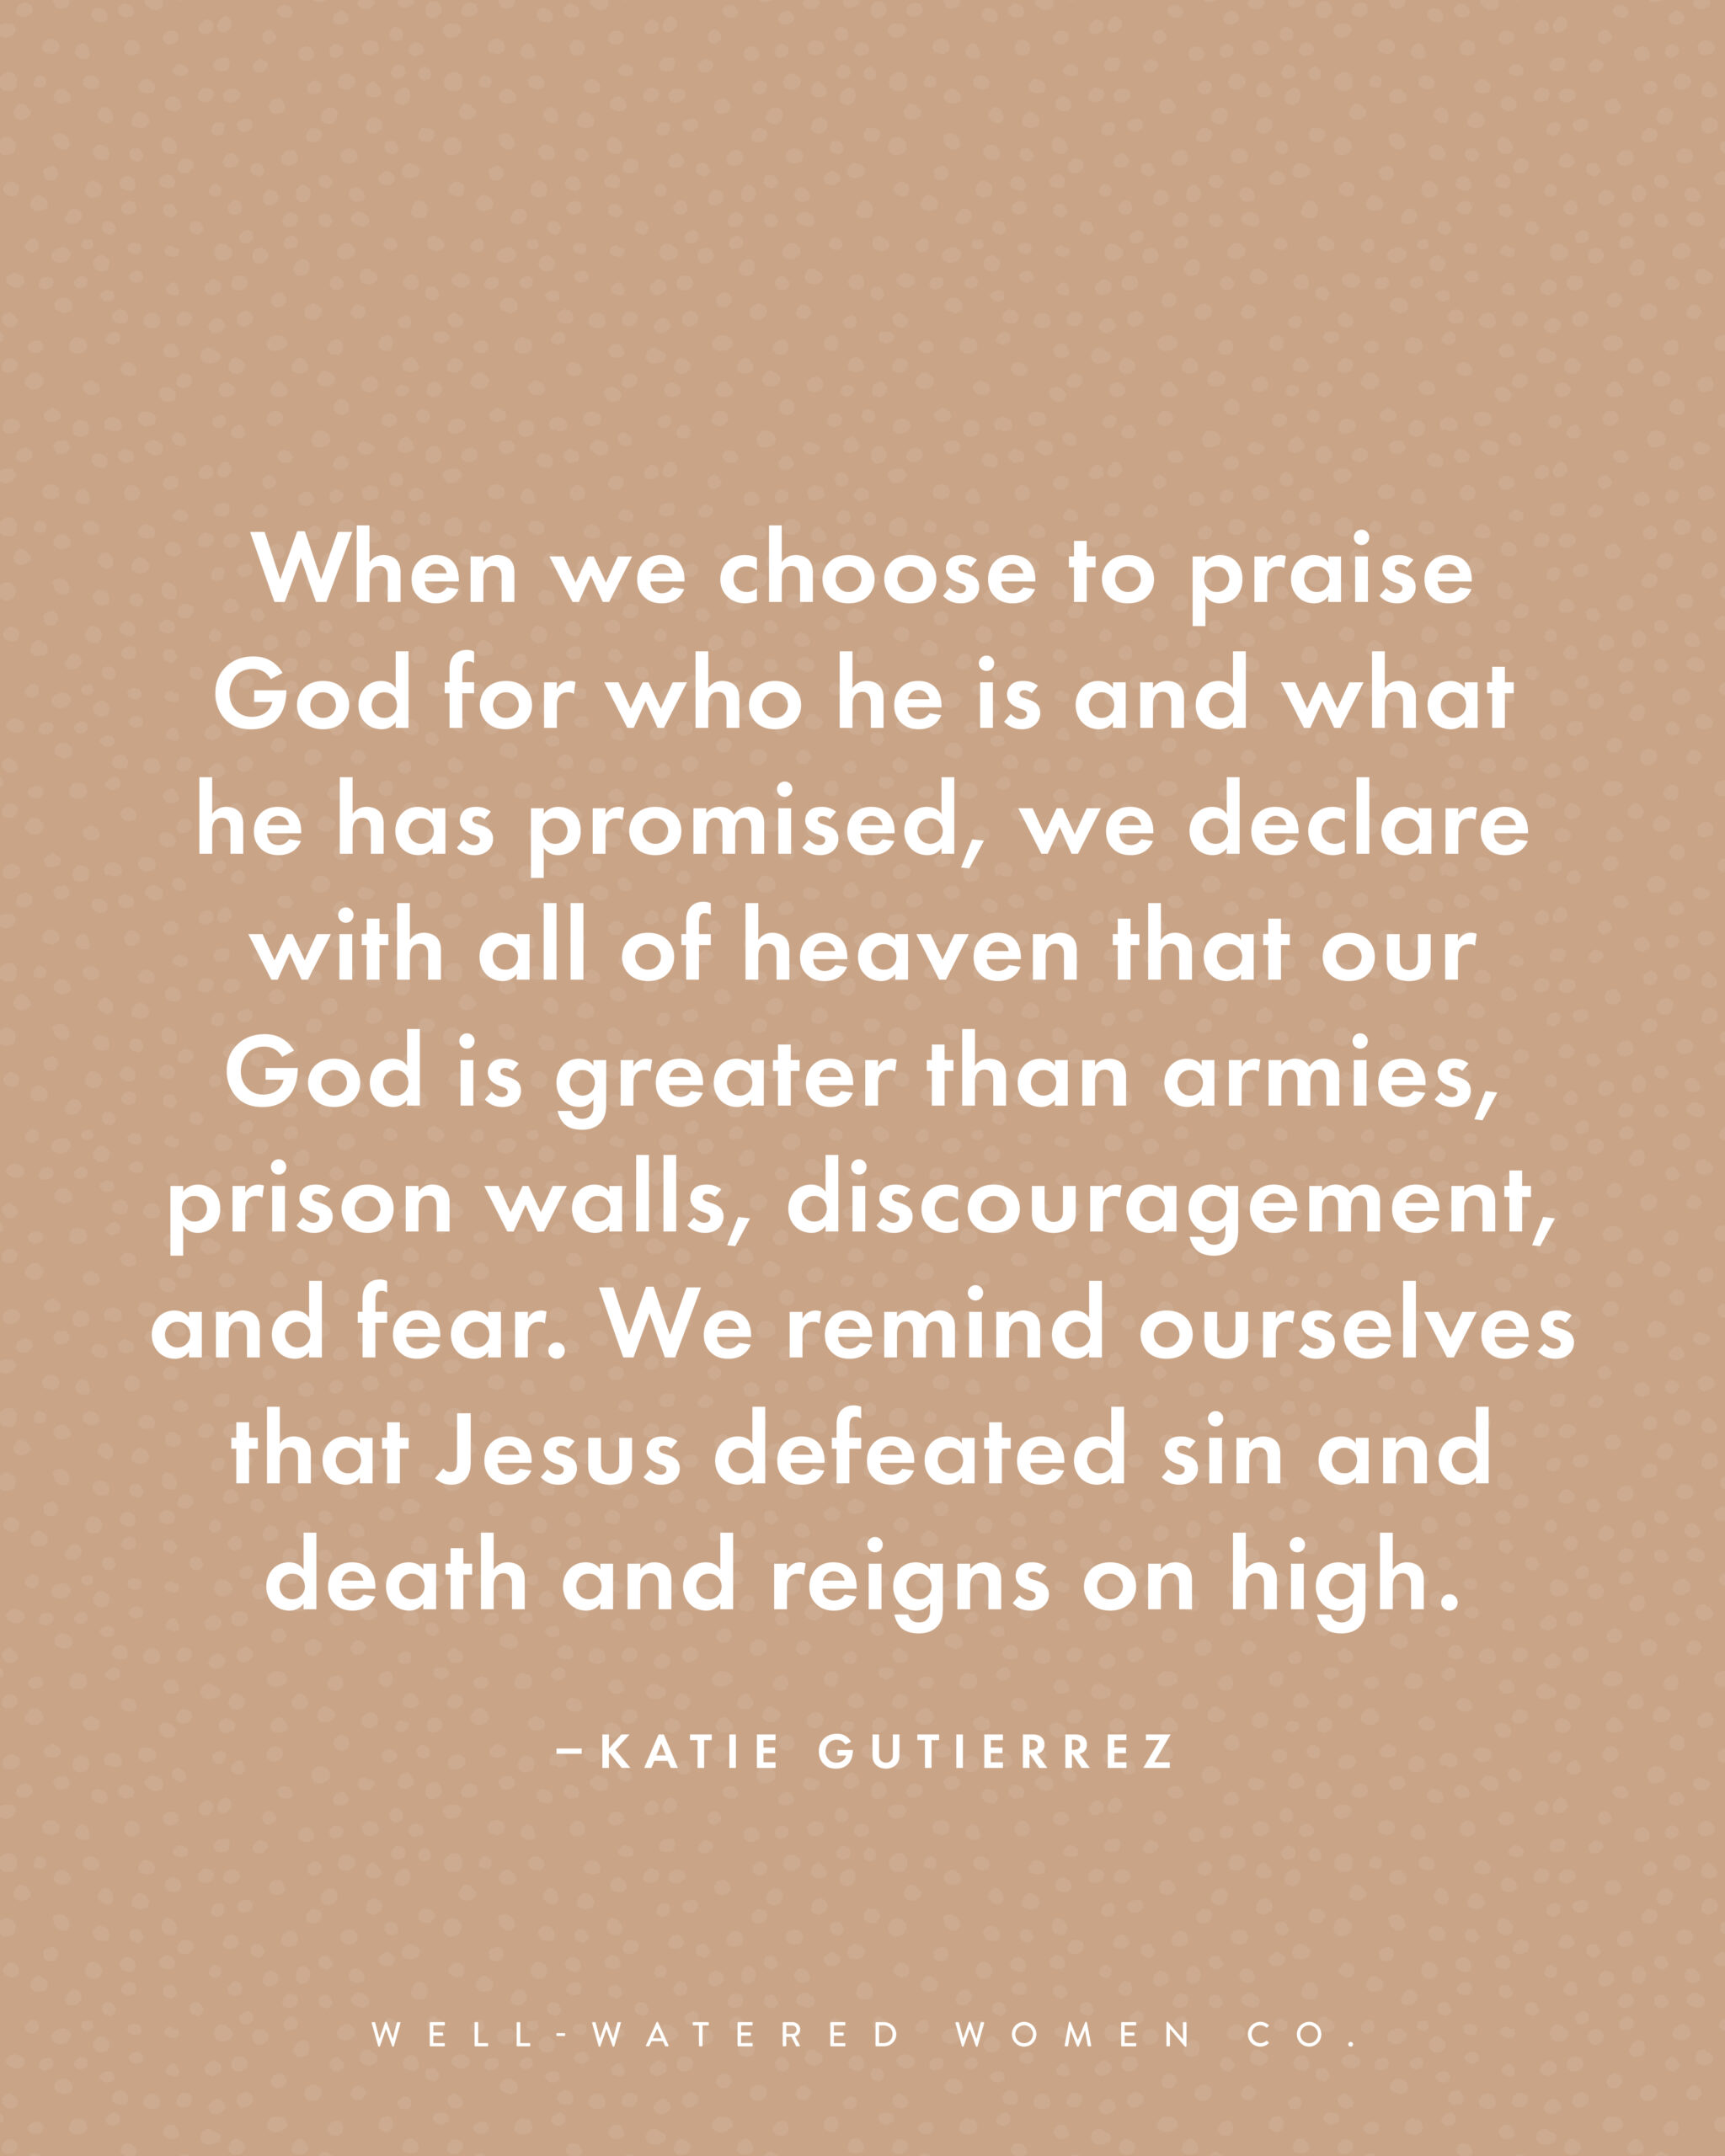 The Power of Praise - an article from Well-Watered Women - quote